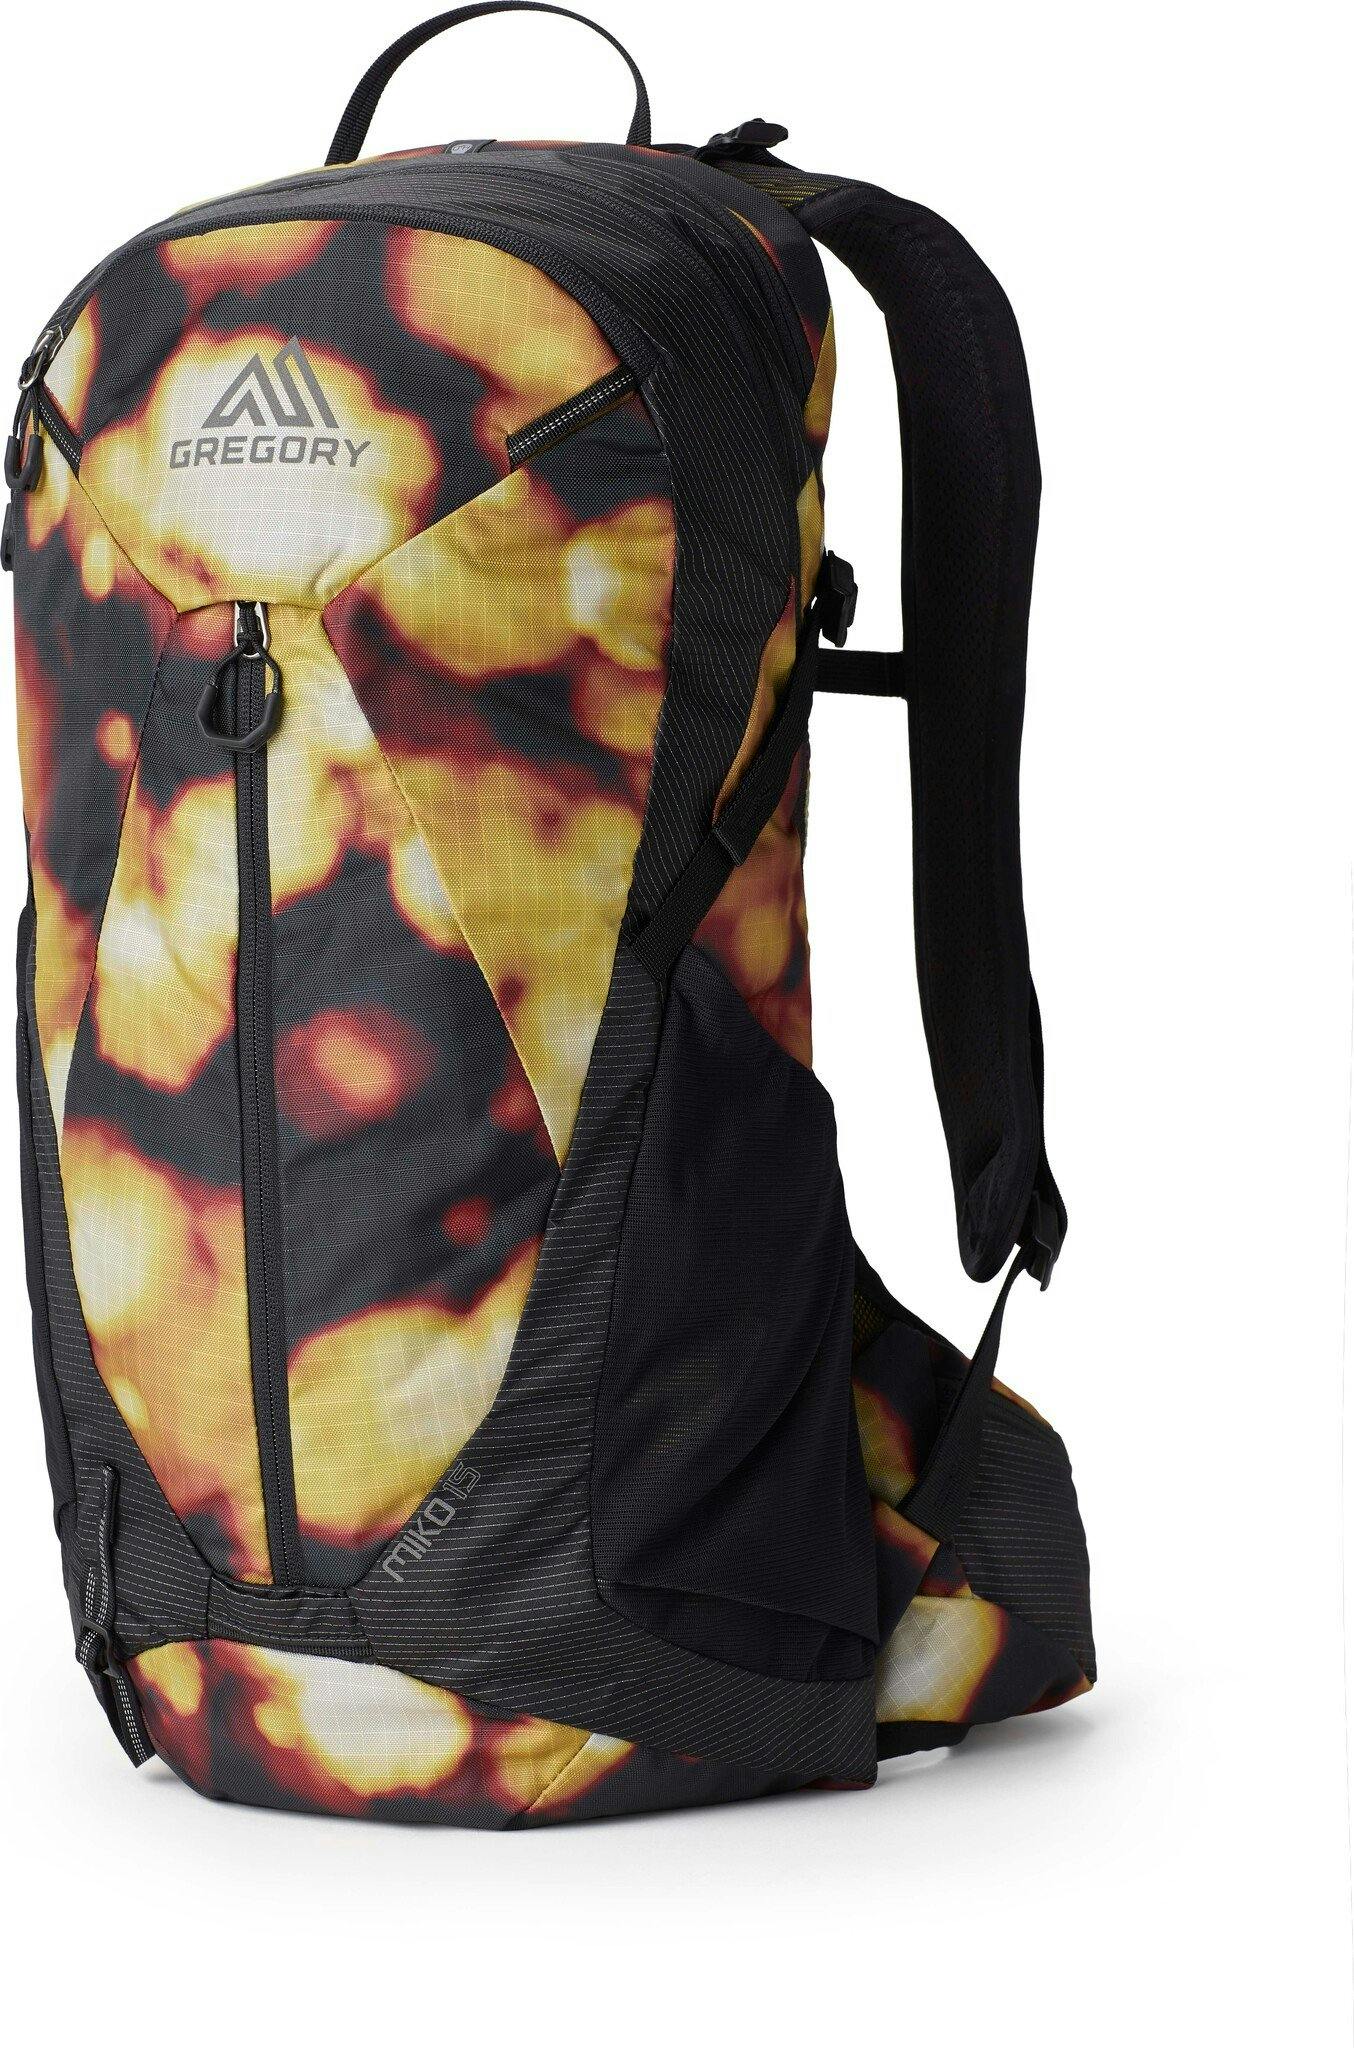 Product image for Miko Backpack 15L - Men's